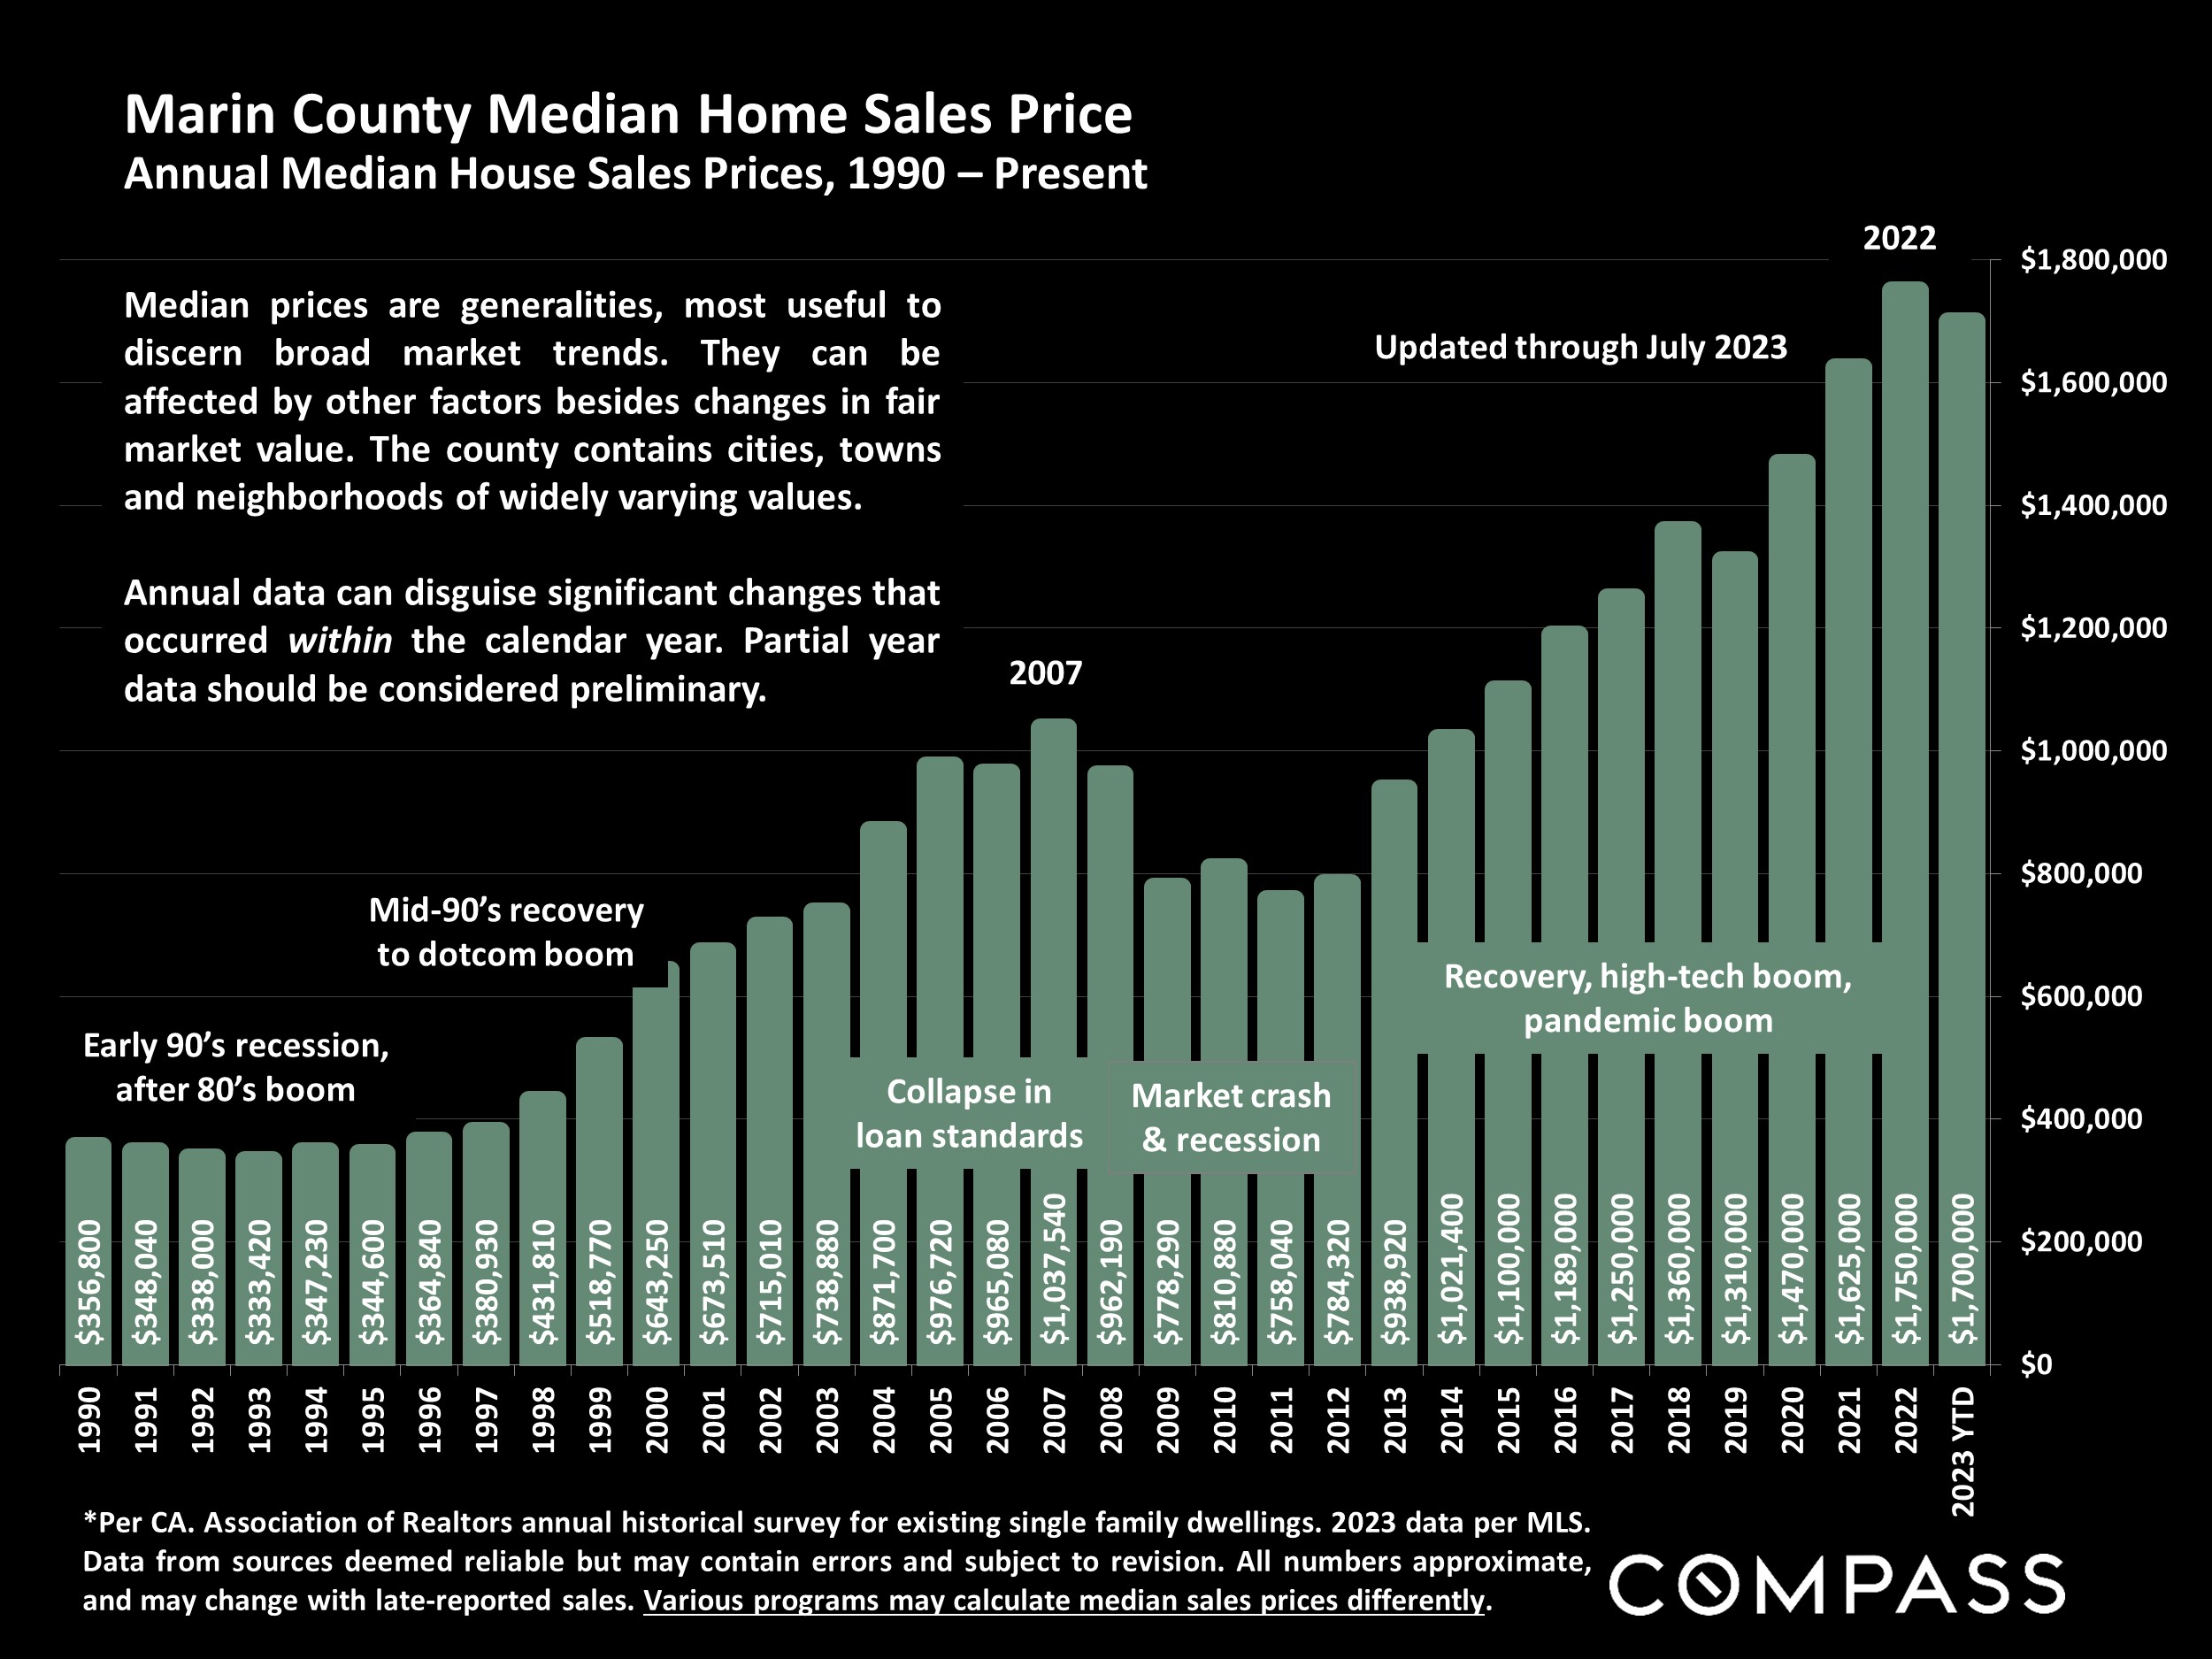 Marin County Median Home Sales Price Annual Median House Sales Prices, 1990 - Present